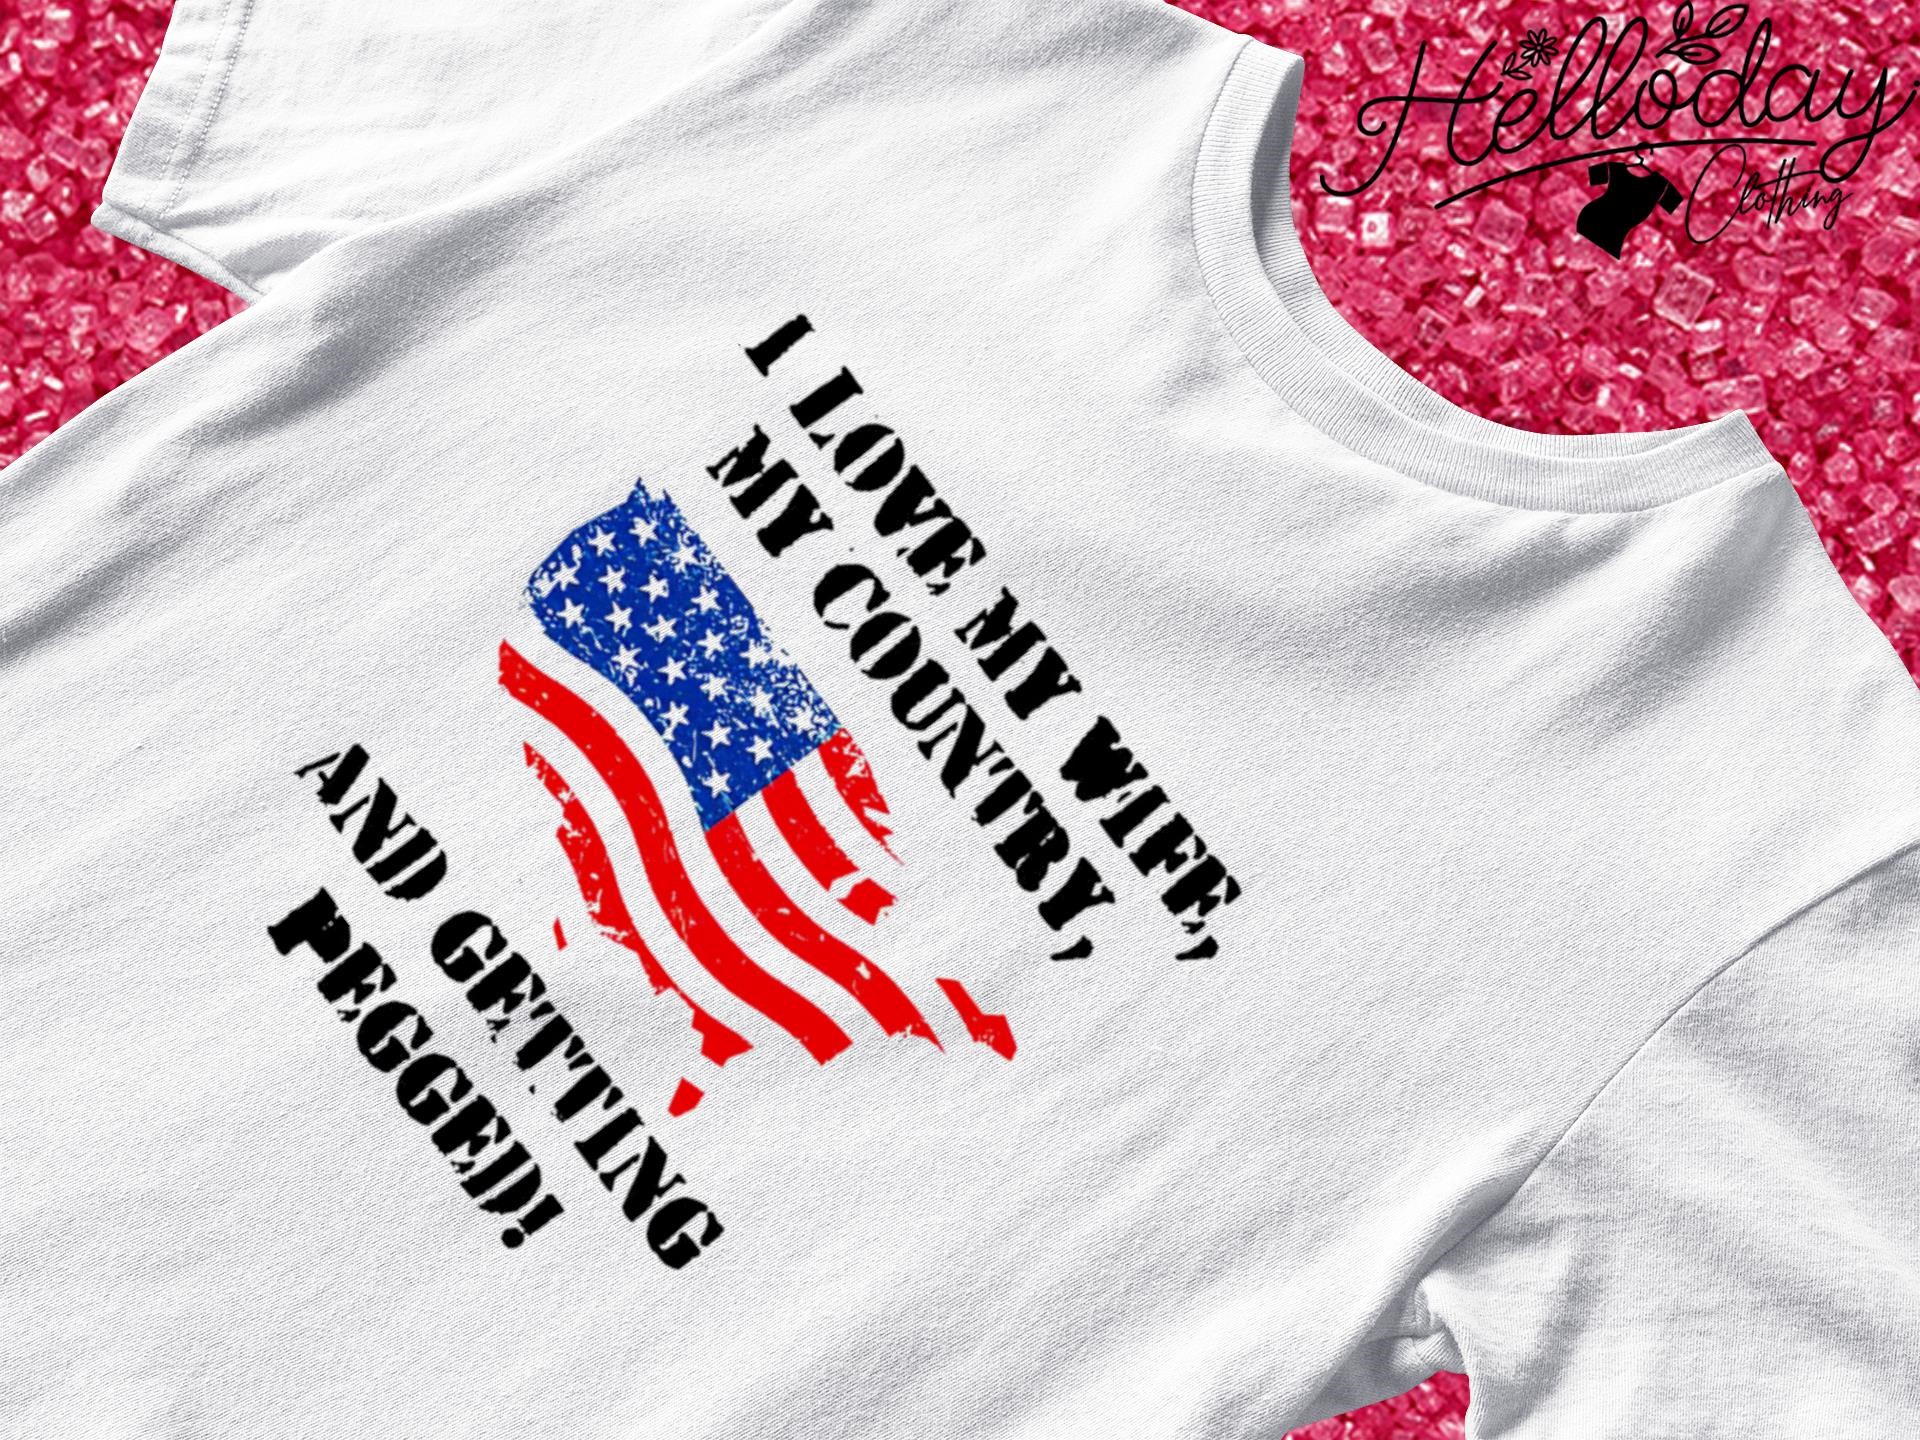 I love my wife my country and getting pegged USA T-shirt